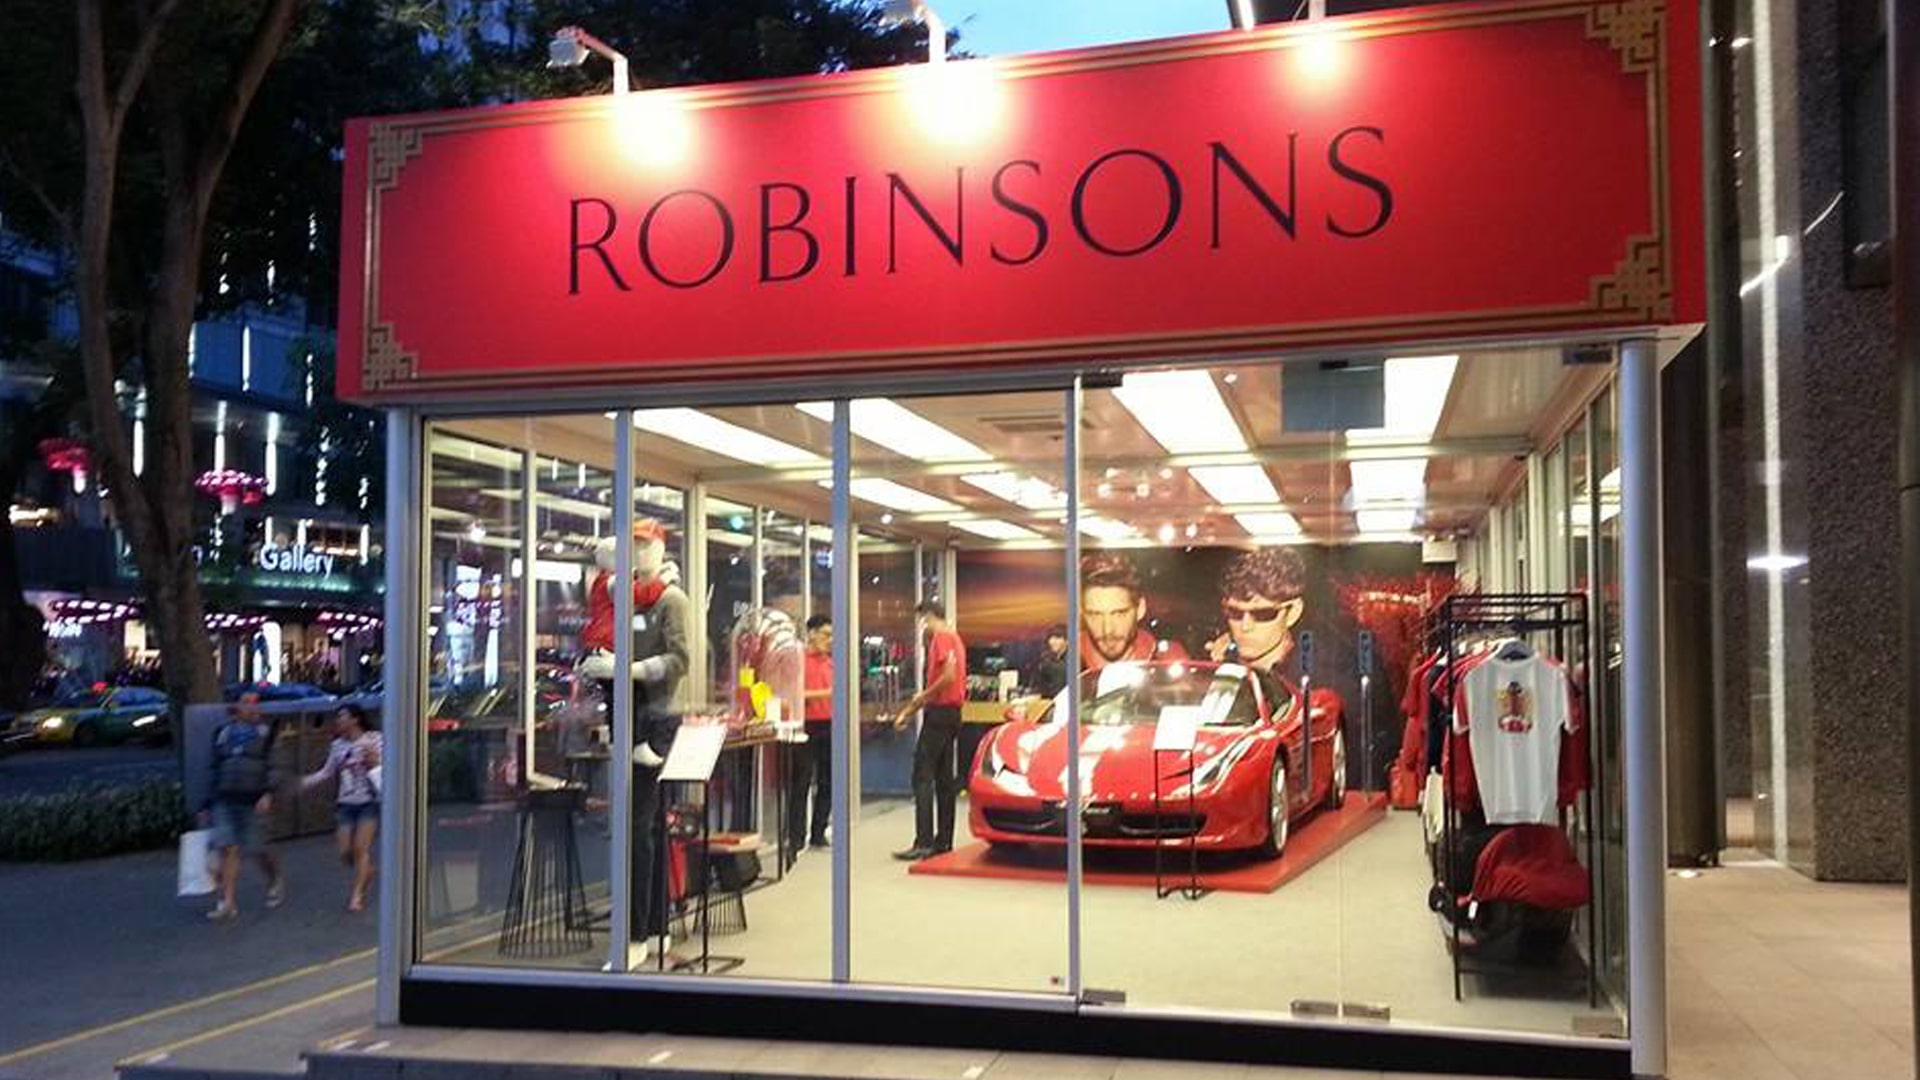 tsc_opt-images_tubelar-system_robinsons-pop-up-merchandise-store-1920x1080-01-min